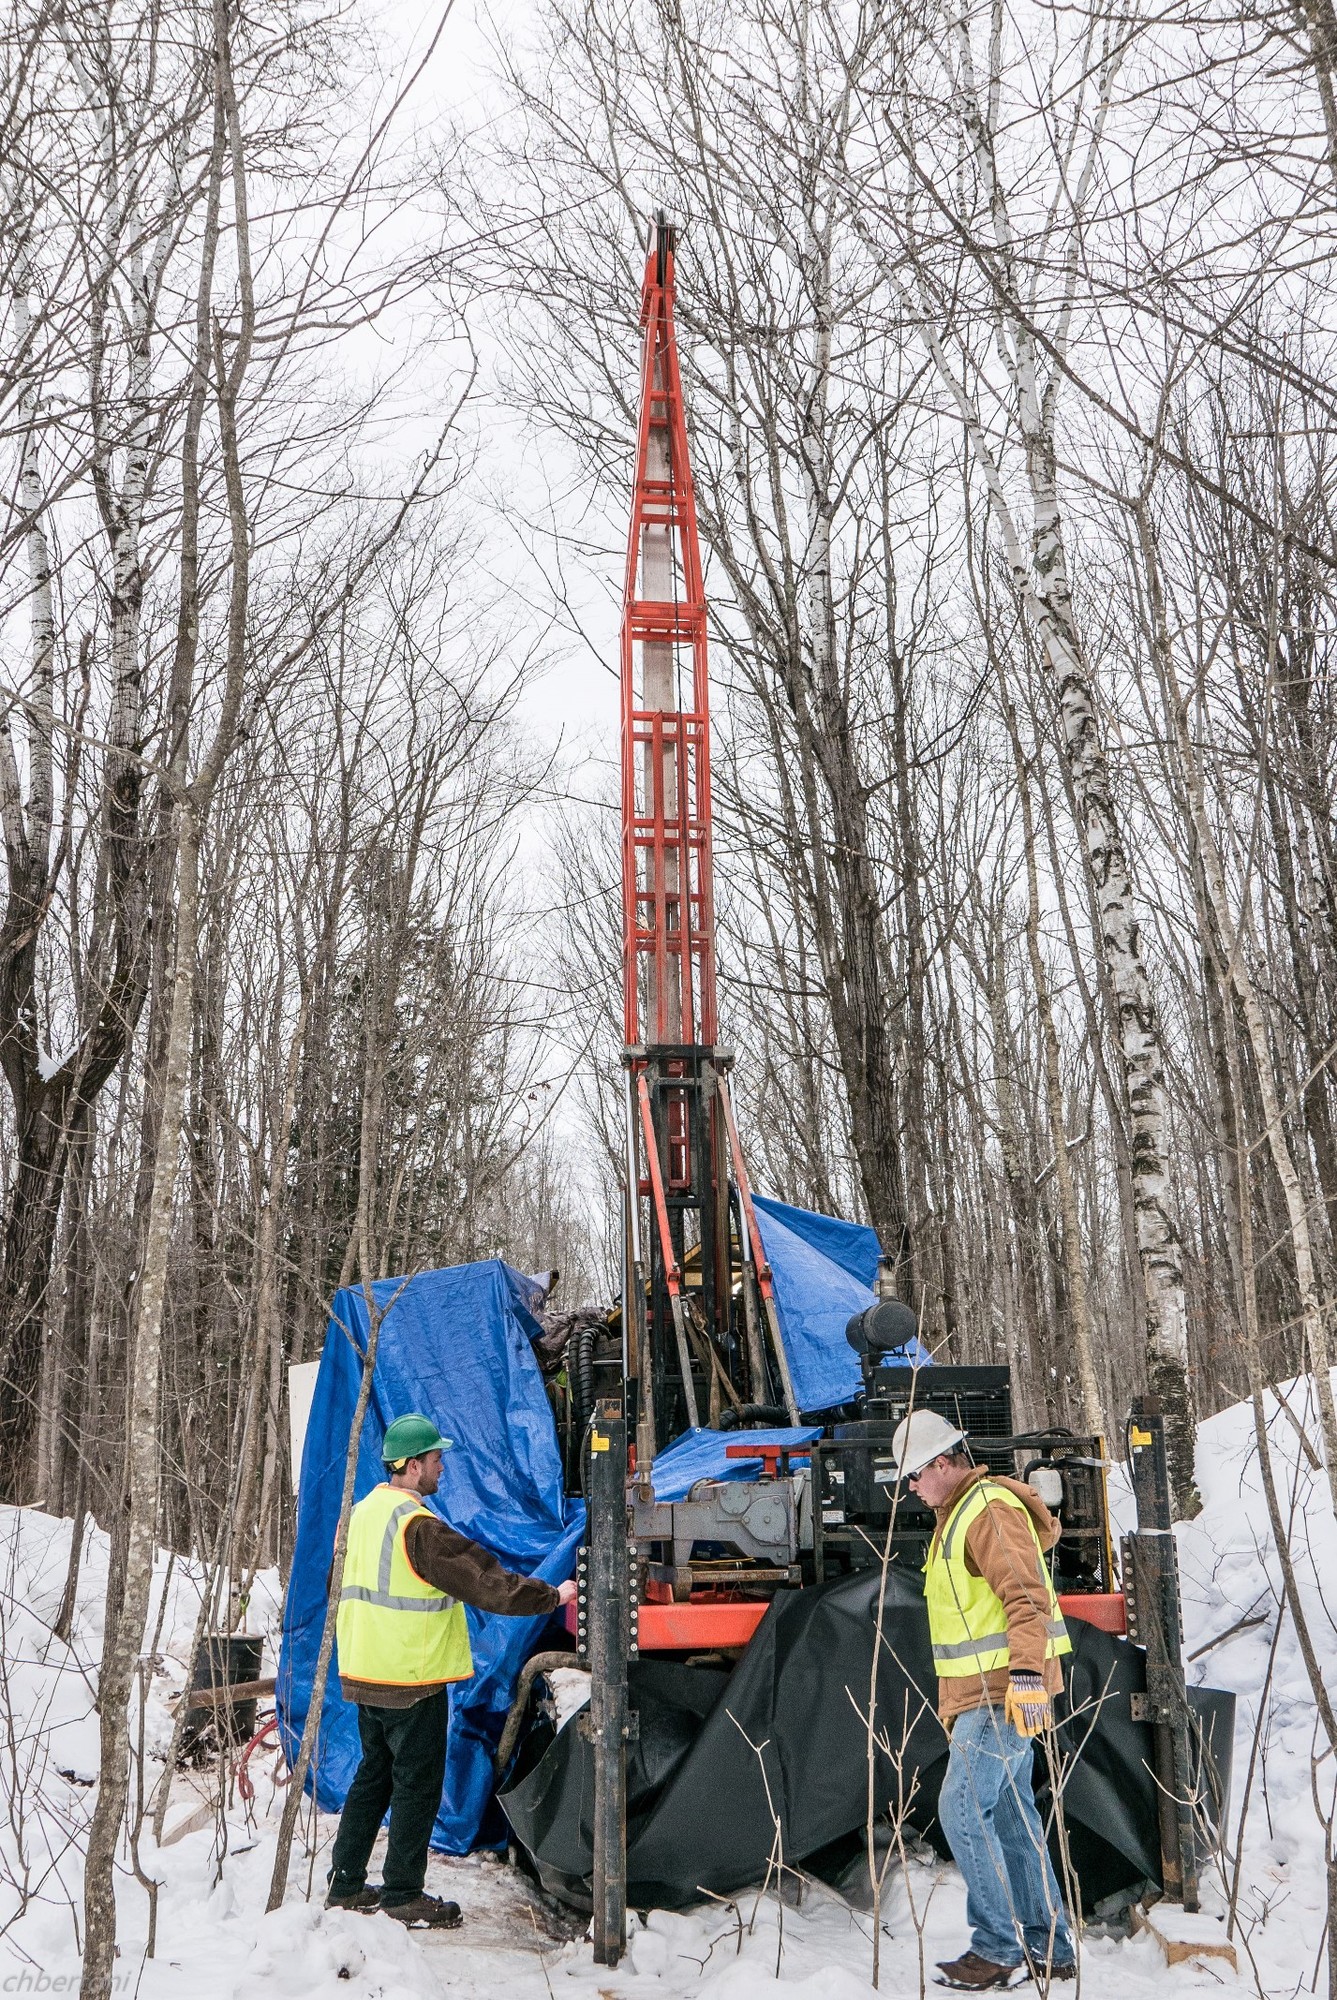 A drilling rig arrives and is set up at Porcupine Mountains Wilderness State Park in February 2017. (Copperwood Resources, Inc. photo)